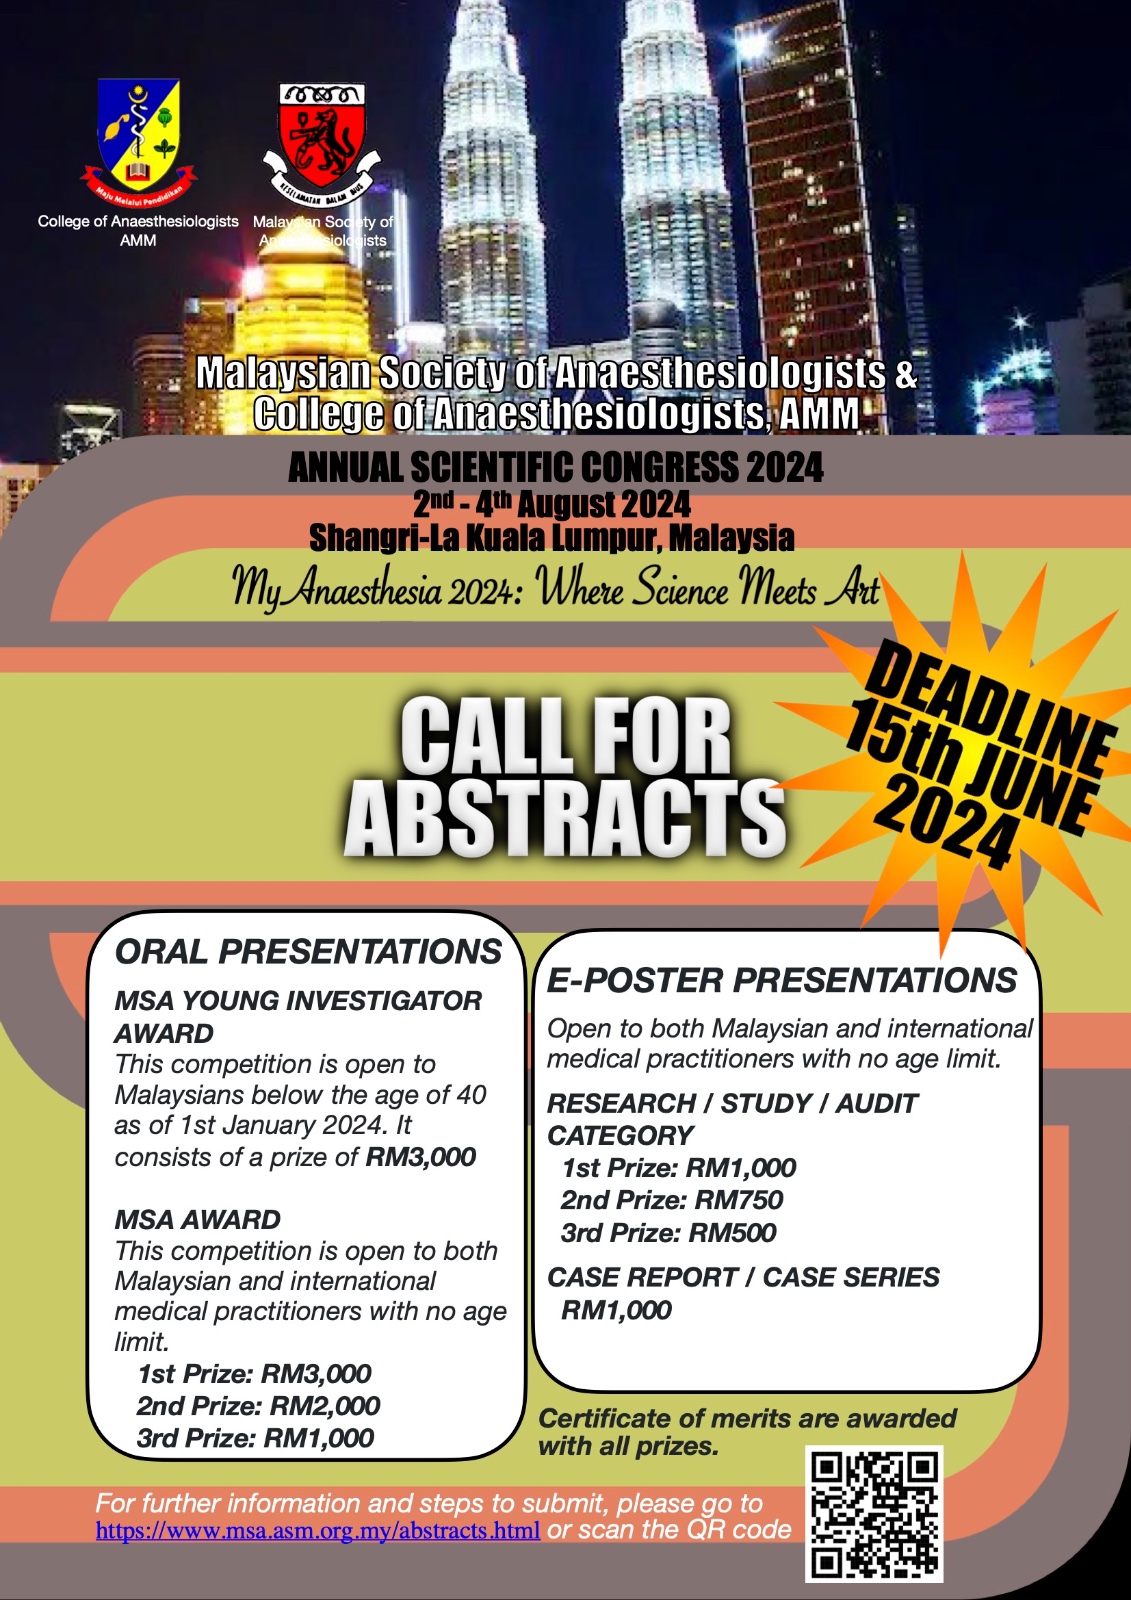 [MyAnaesthesia 2024] Call for Abstracts